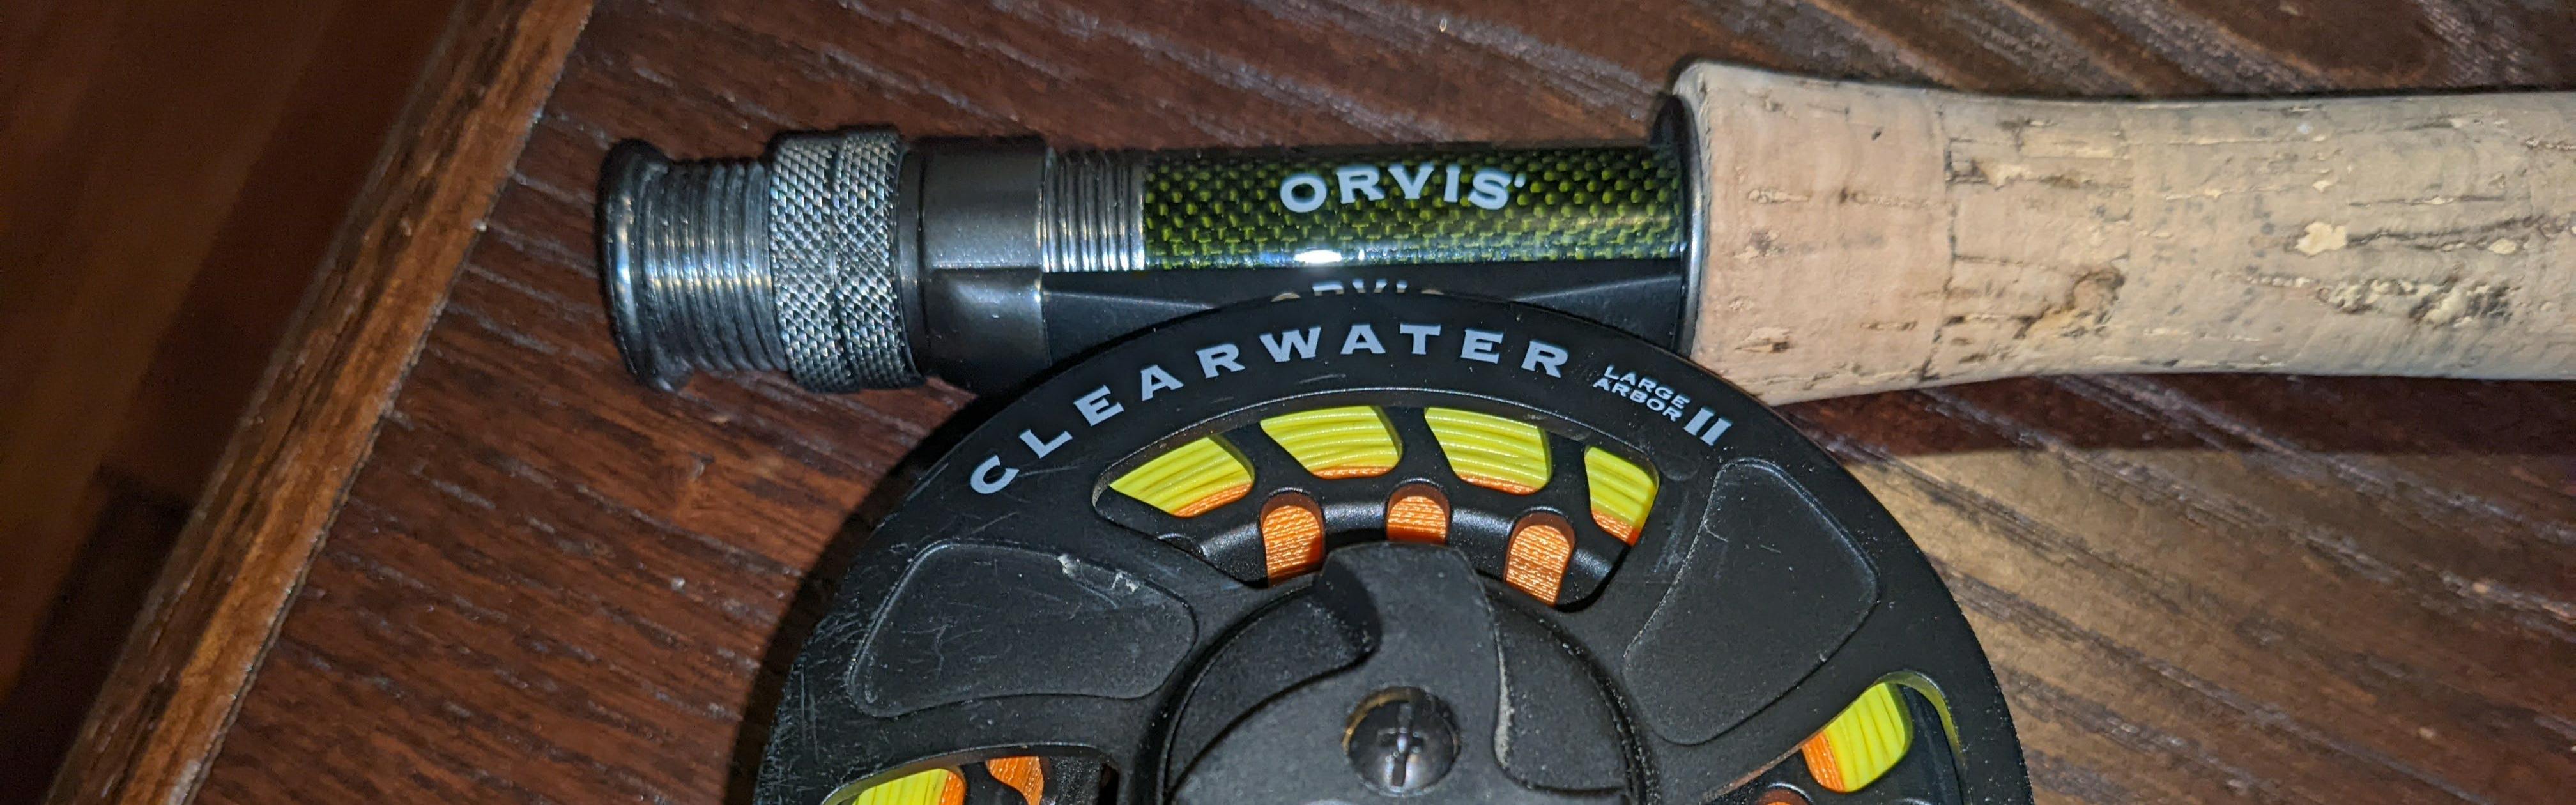 Expert Review: Orvis Clearwater Fly Rod Outfit